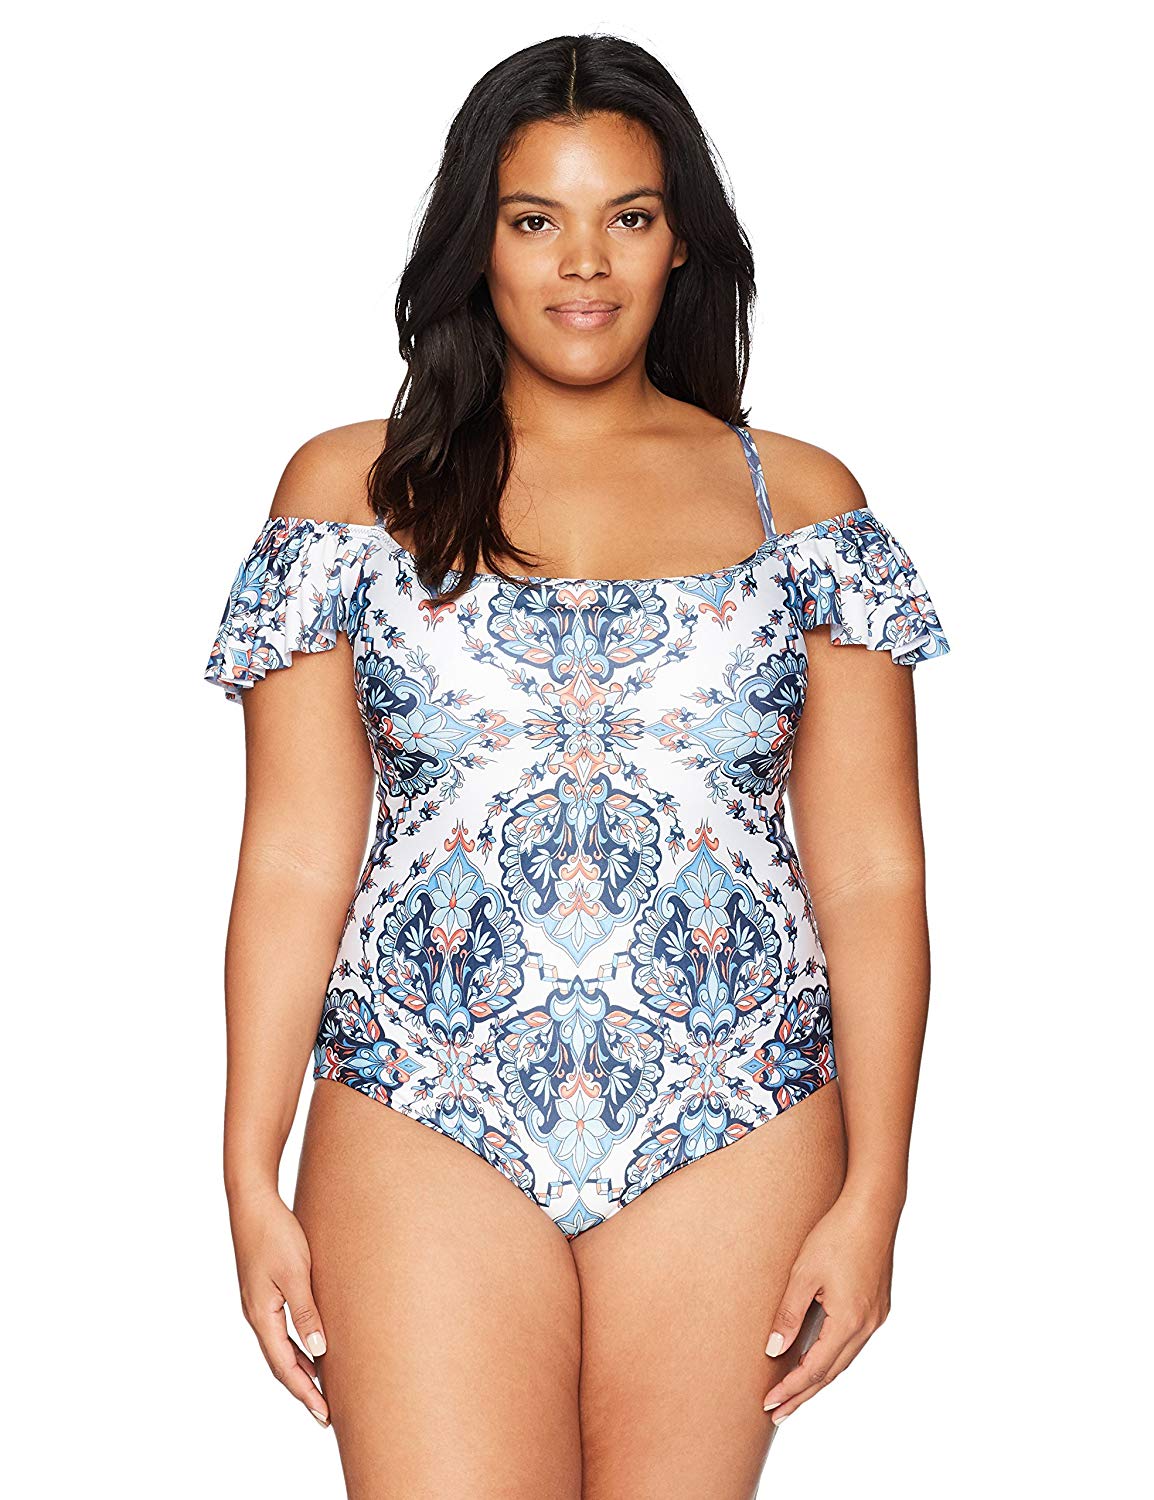 Becca Womens Plus Size Naples Off The Shoulder One Piece Swimsuit (1X, Multi) - image 1 of 2